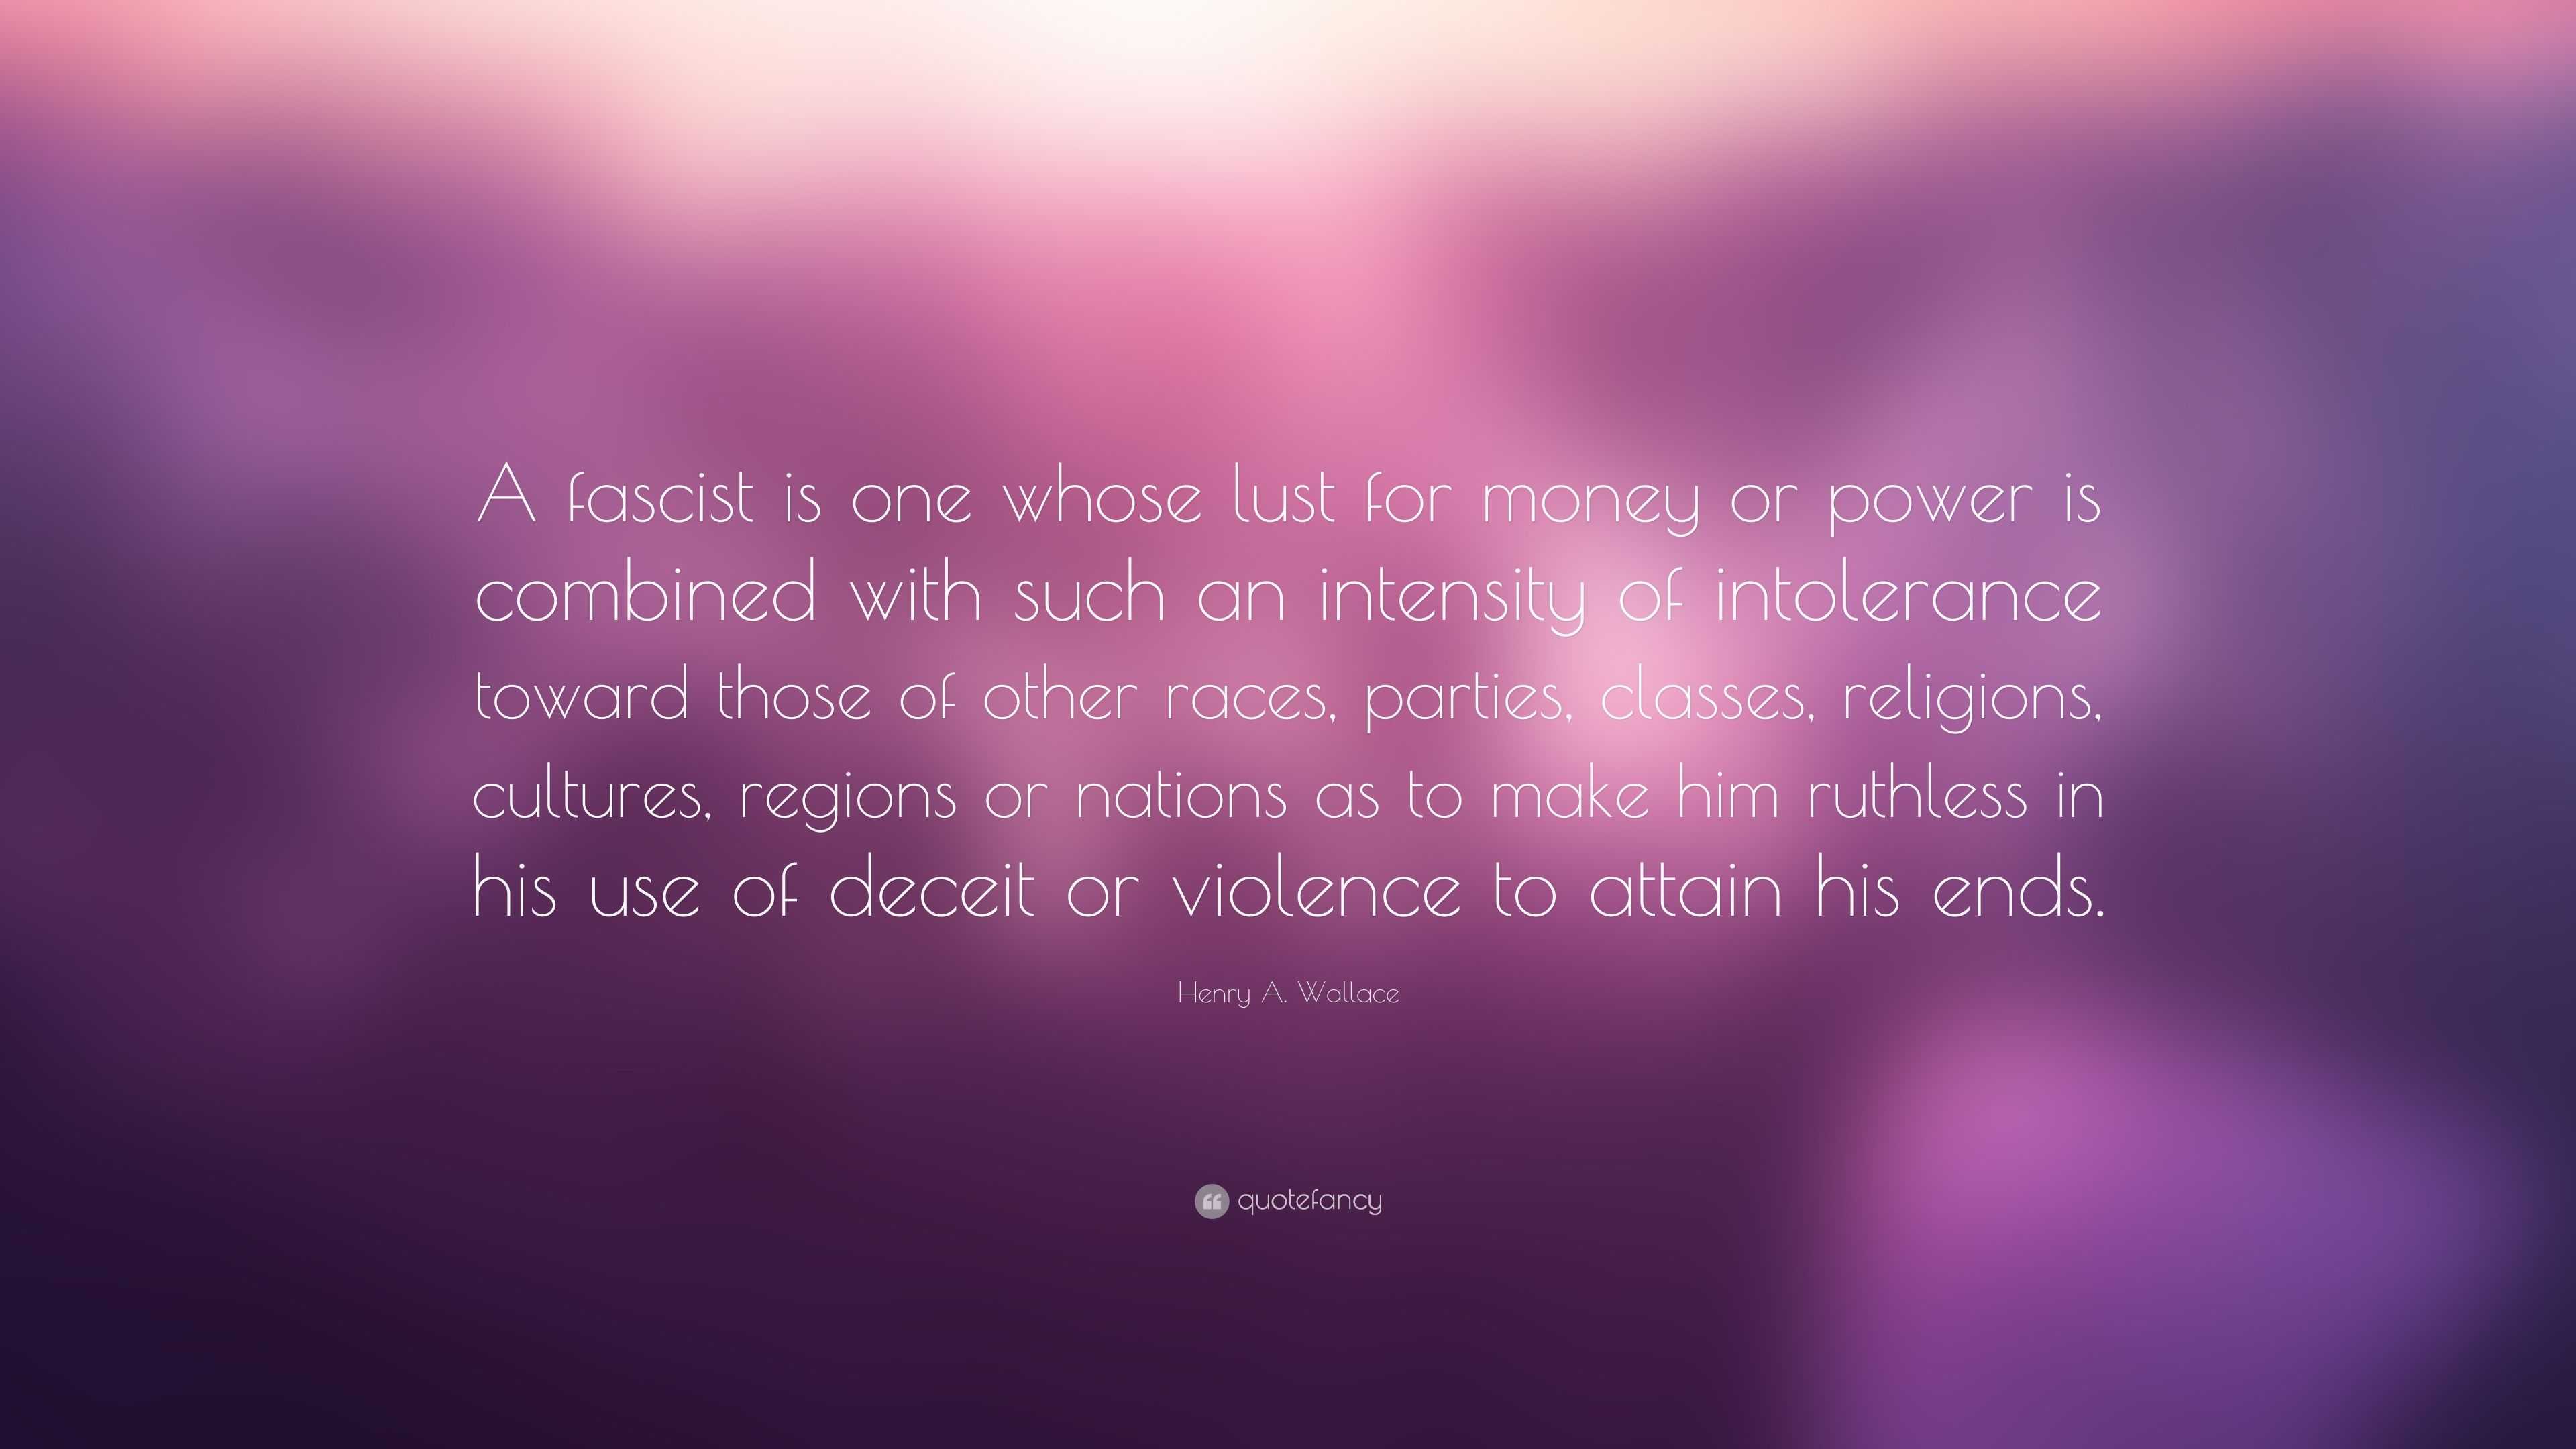 Henry A. Wallace Quote: “A fascist is one whose lust for money or power